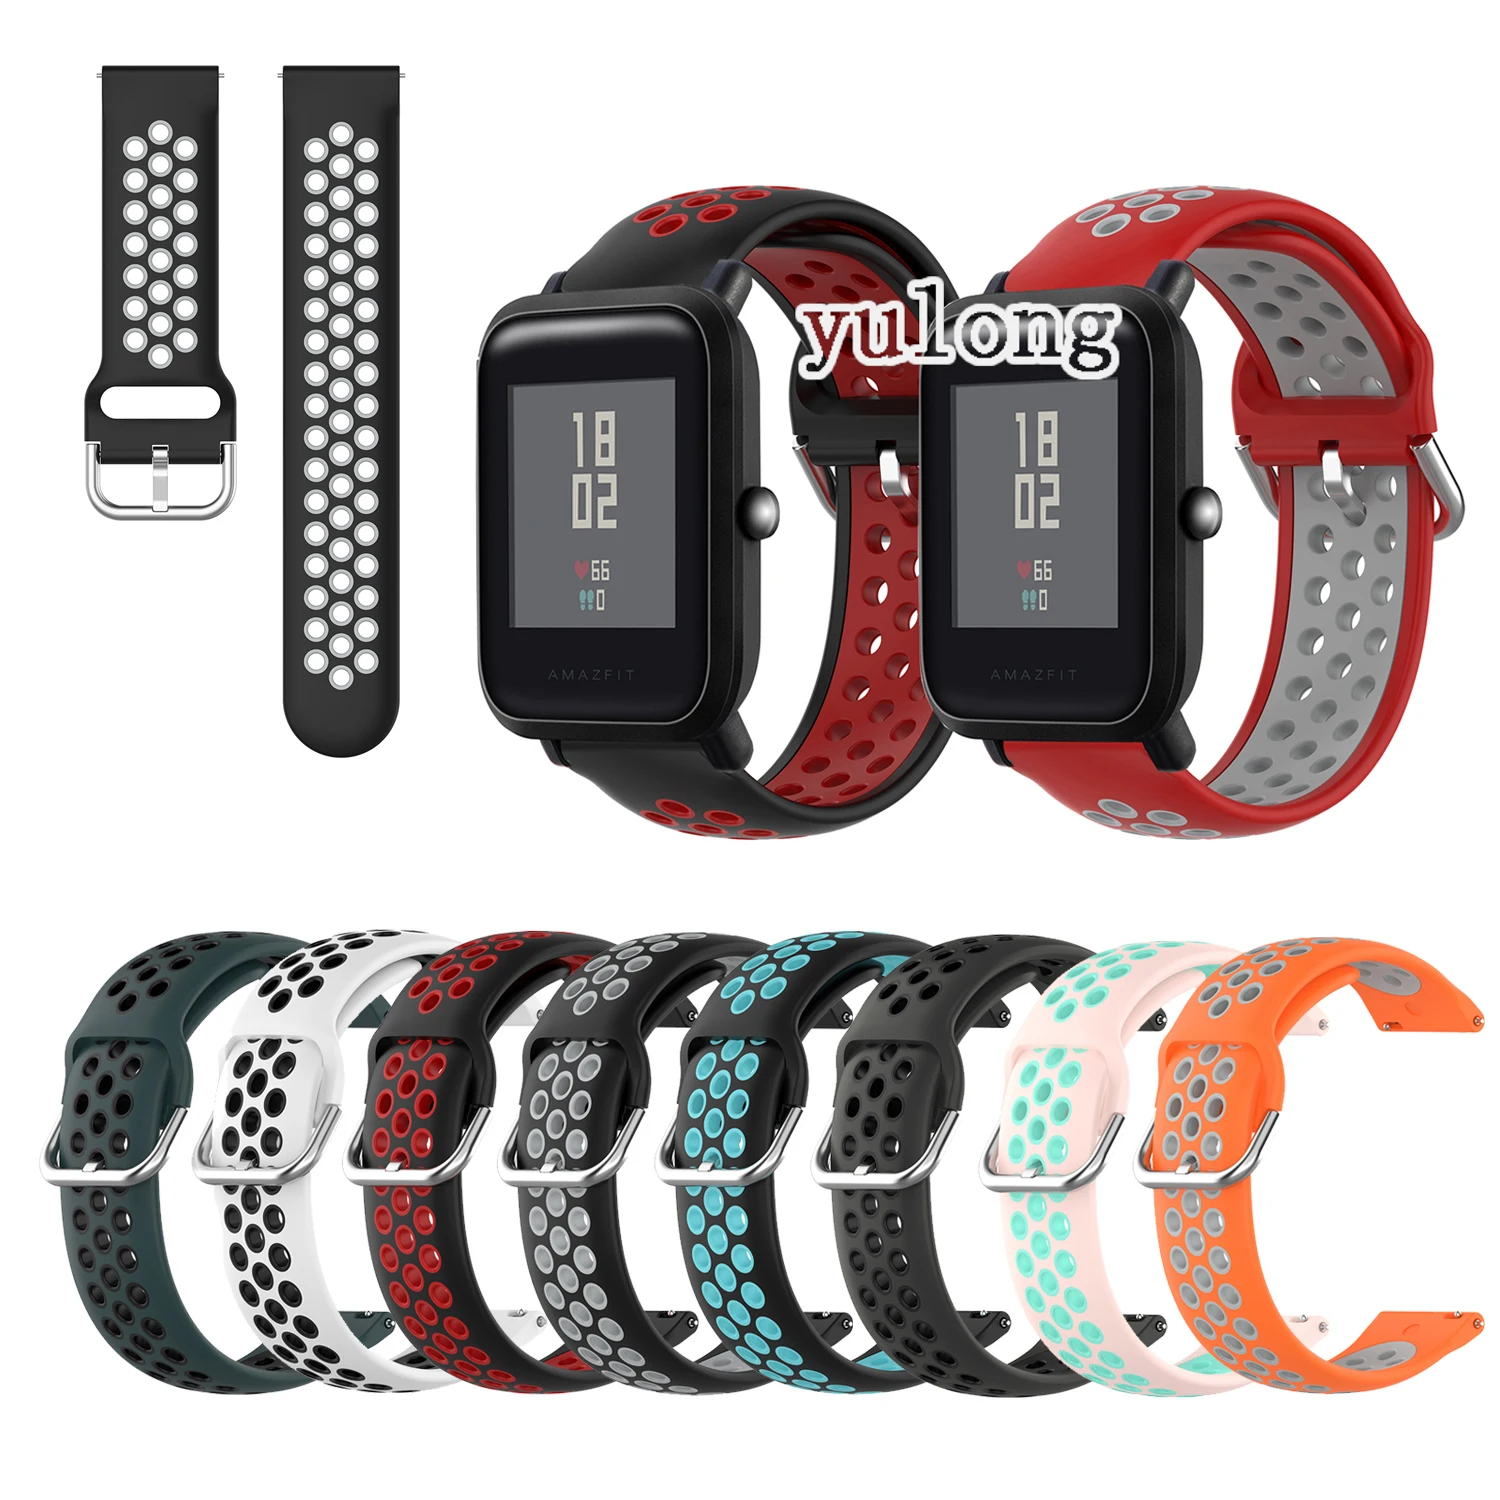 20mm Sport Silicone Breathable Watch Band Strap For Huami Amazfit Bip U S Lite GTS 2 GTS2 mini Neo Smart Watch Wristband 22mm